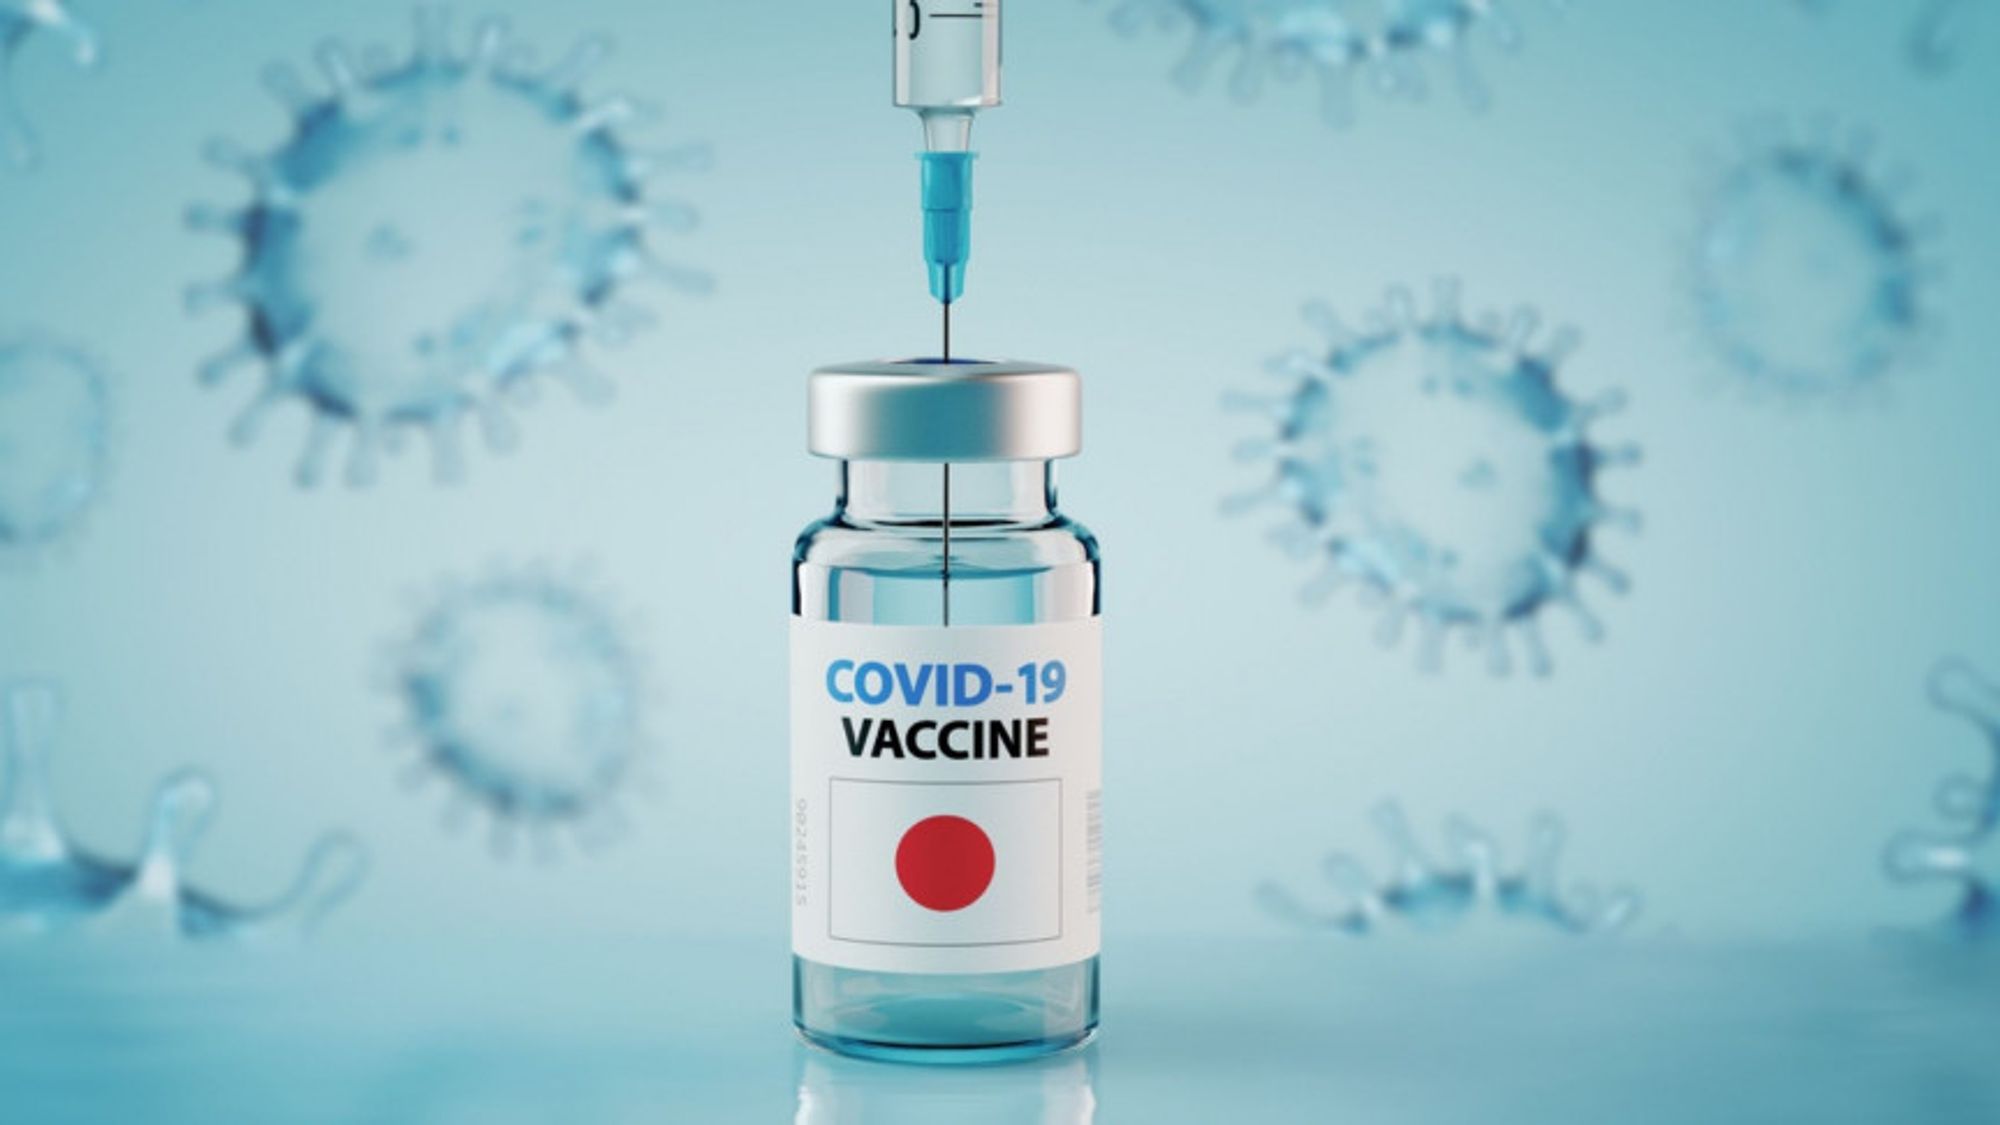 Japan Is Working on a COVID-19 Vaccine That Offers Lifelong Immunity